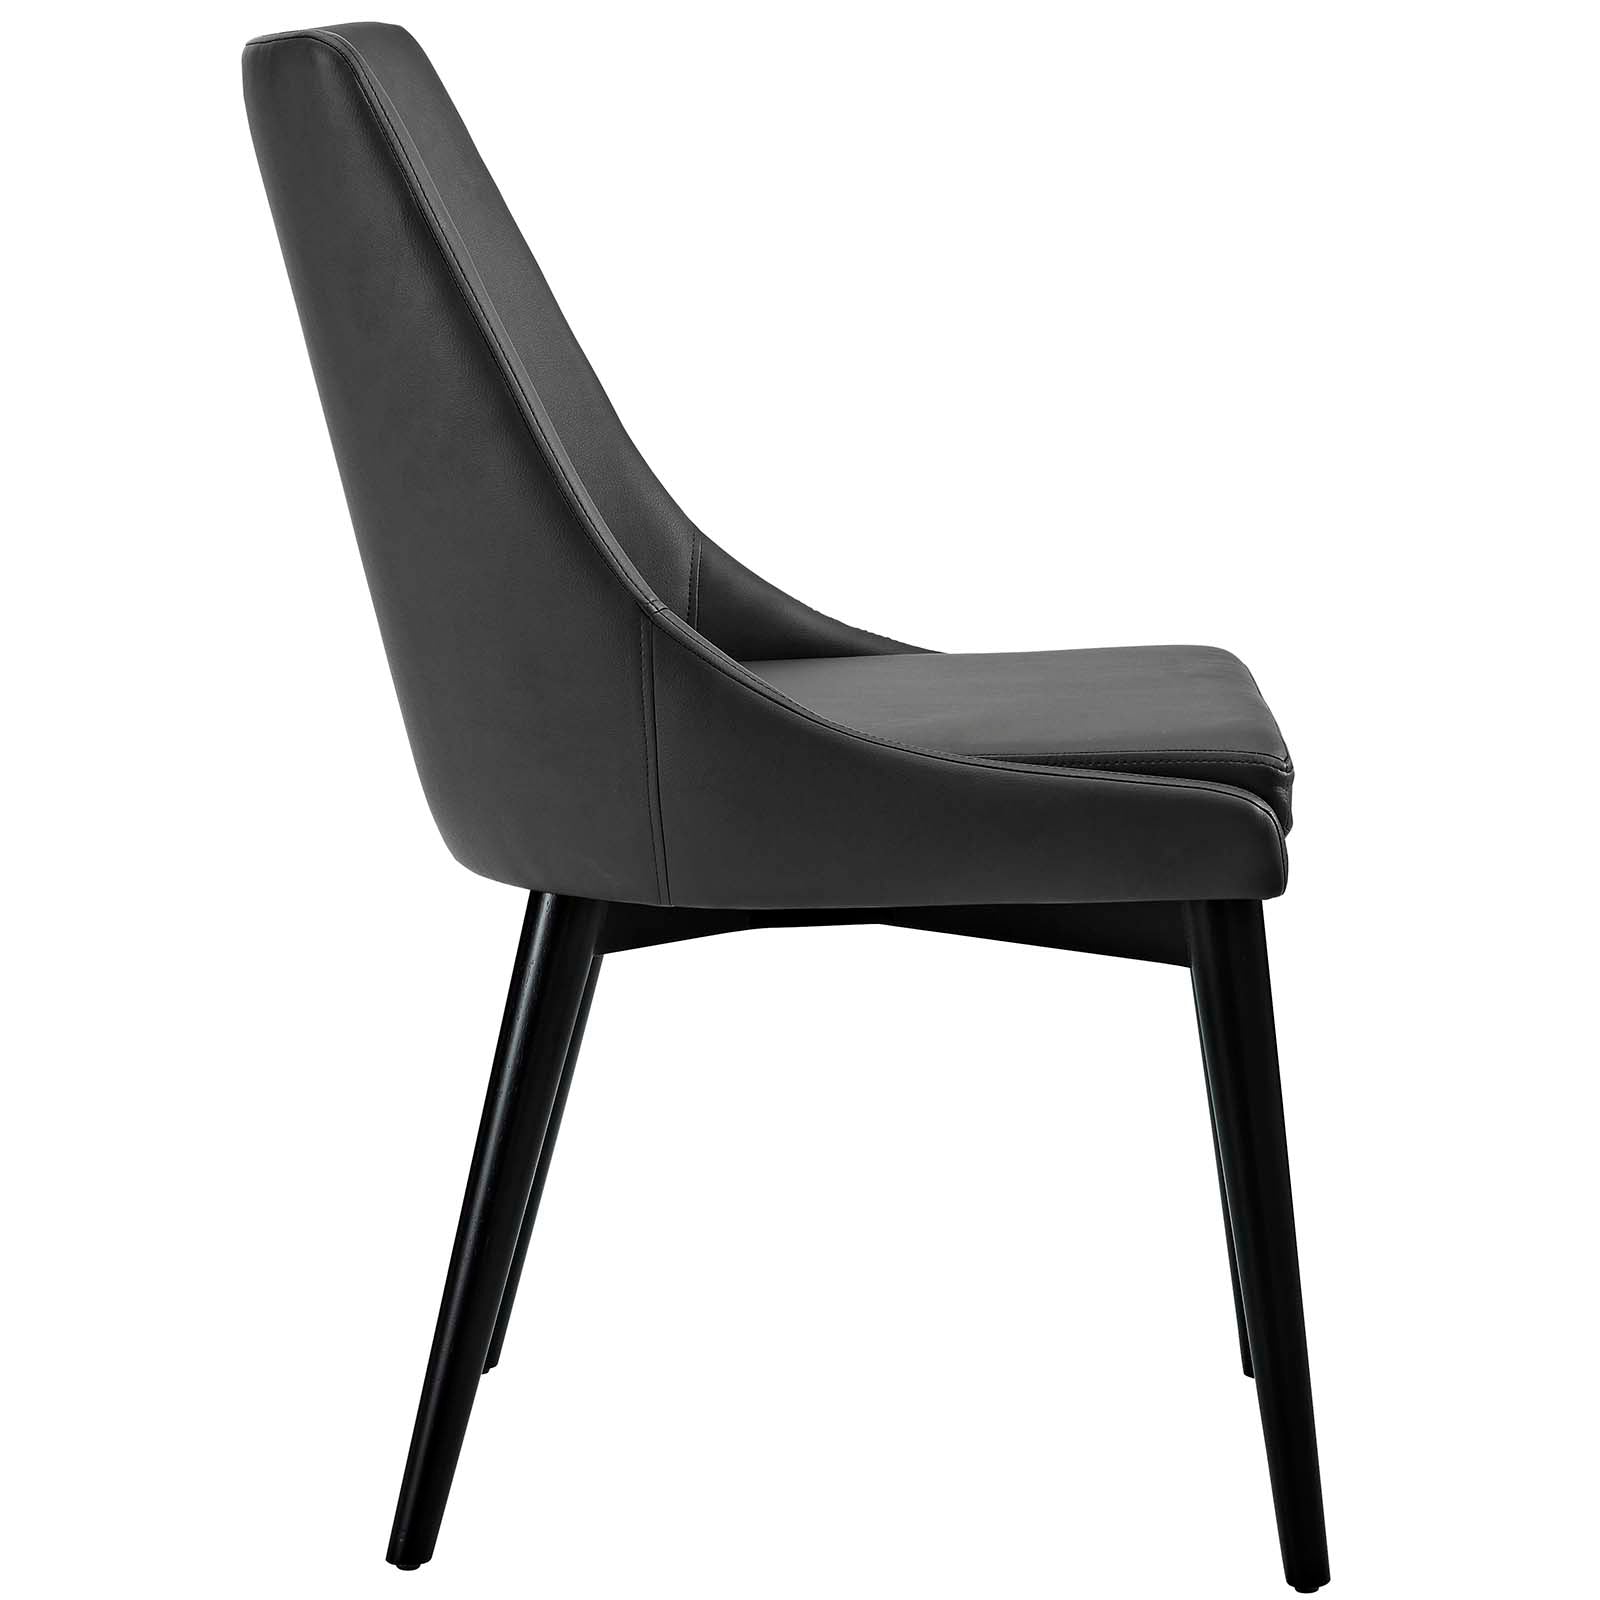 Modway Dining Chairs - Viscount Vinyl Dining Chair Black